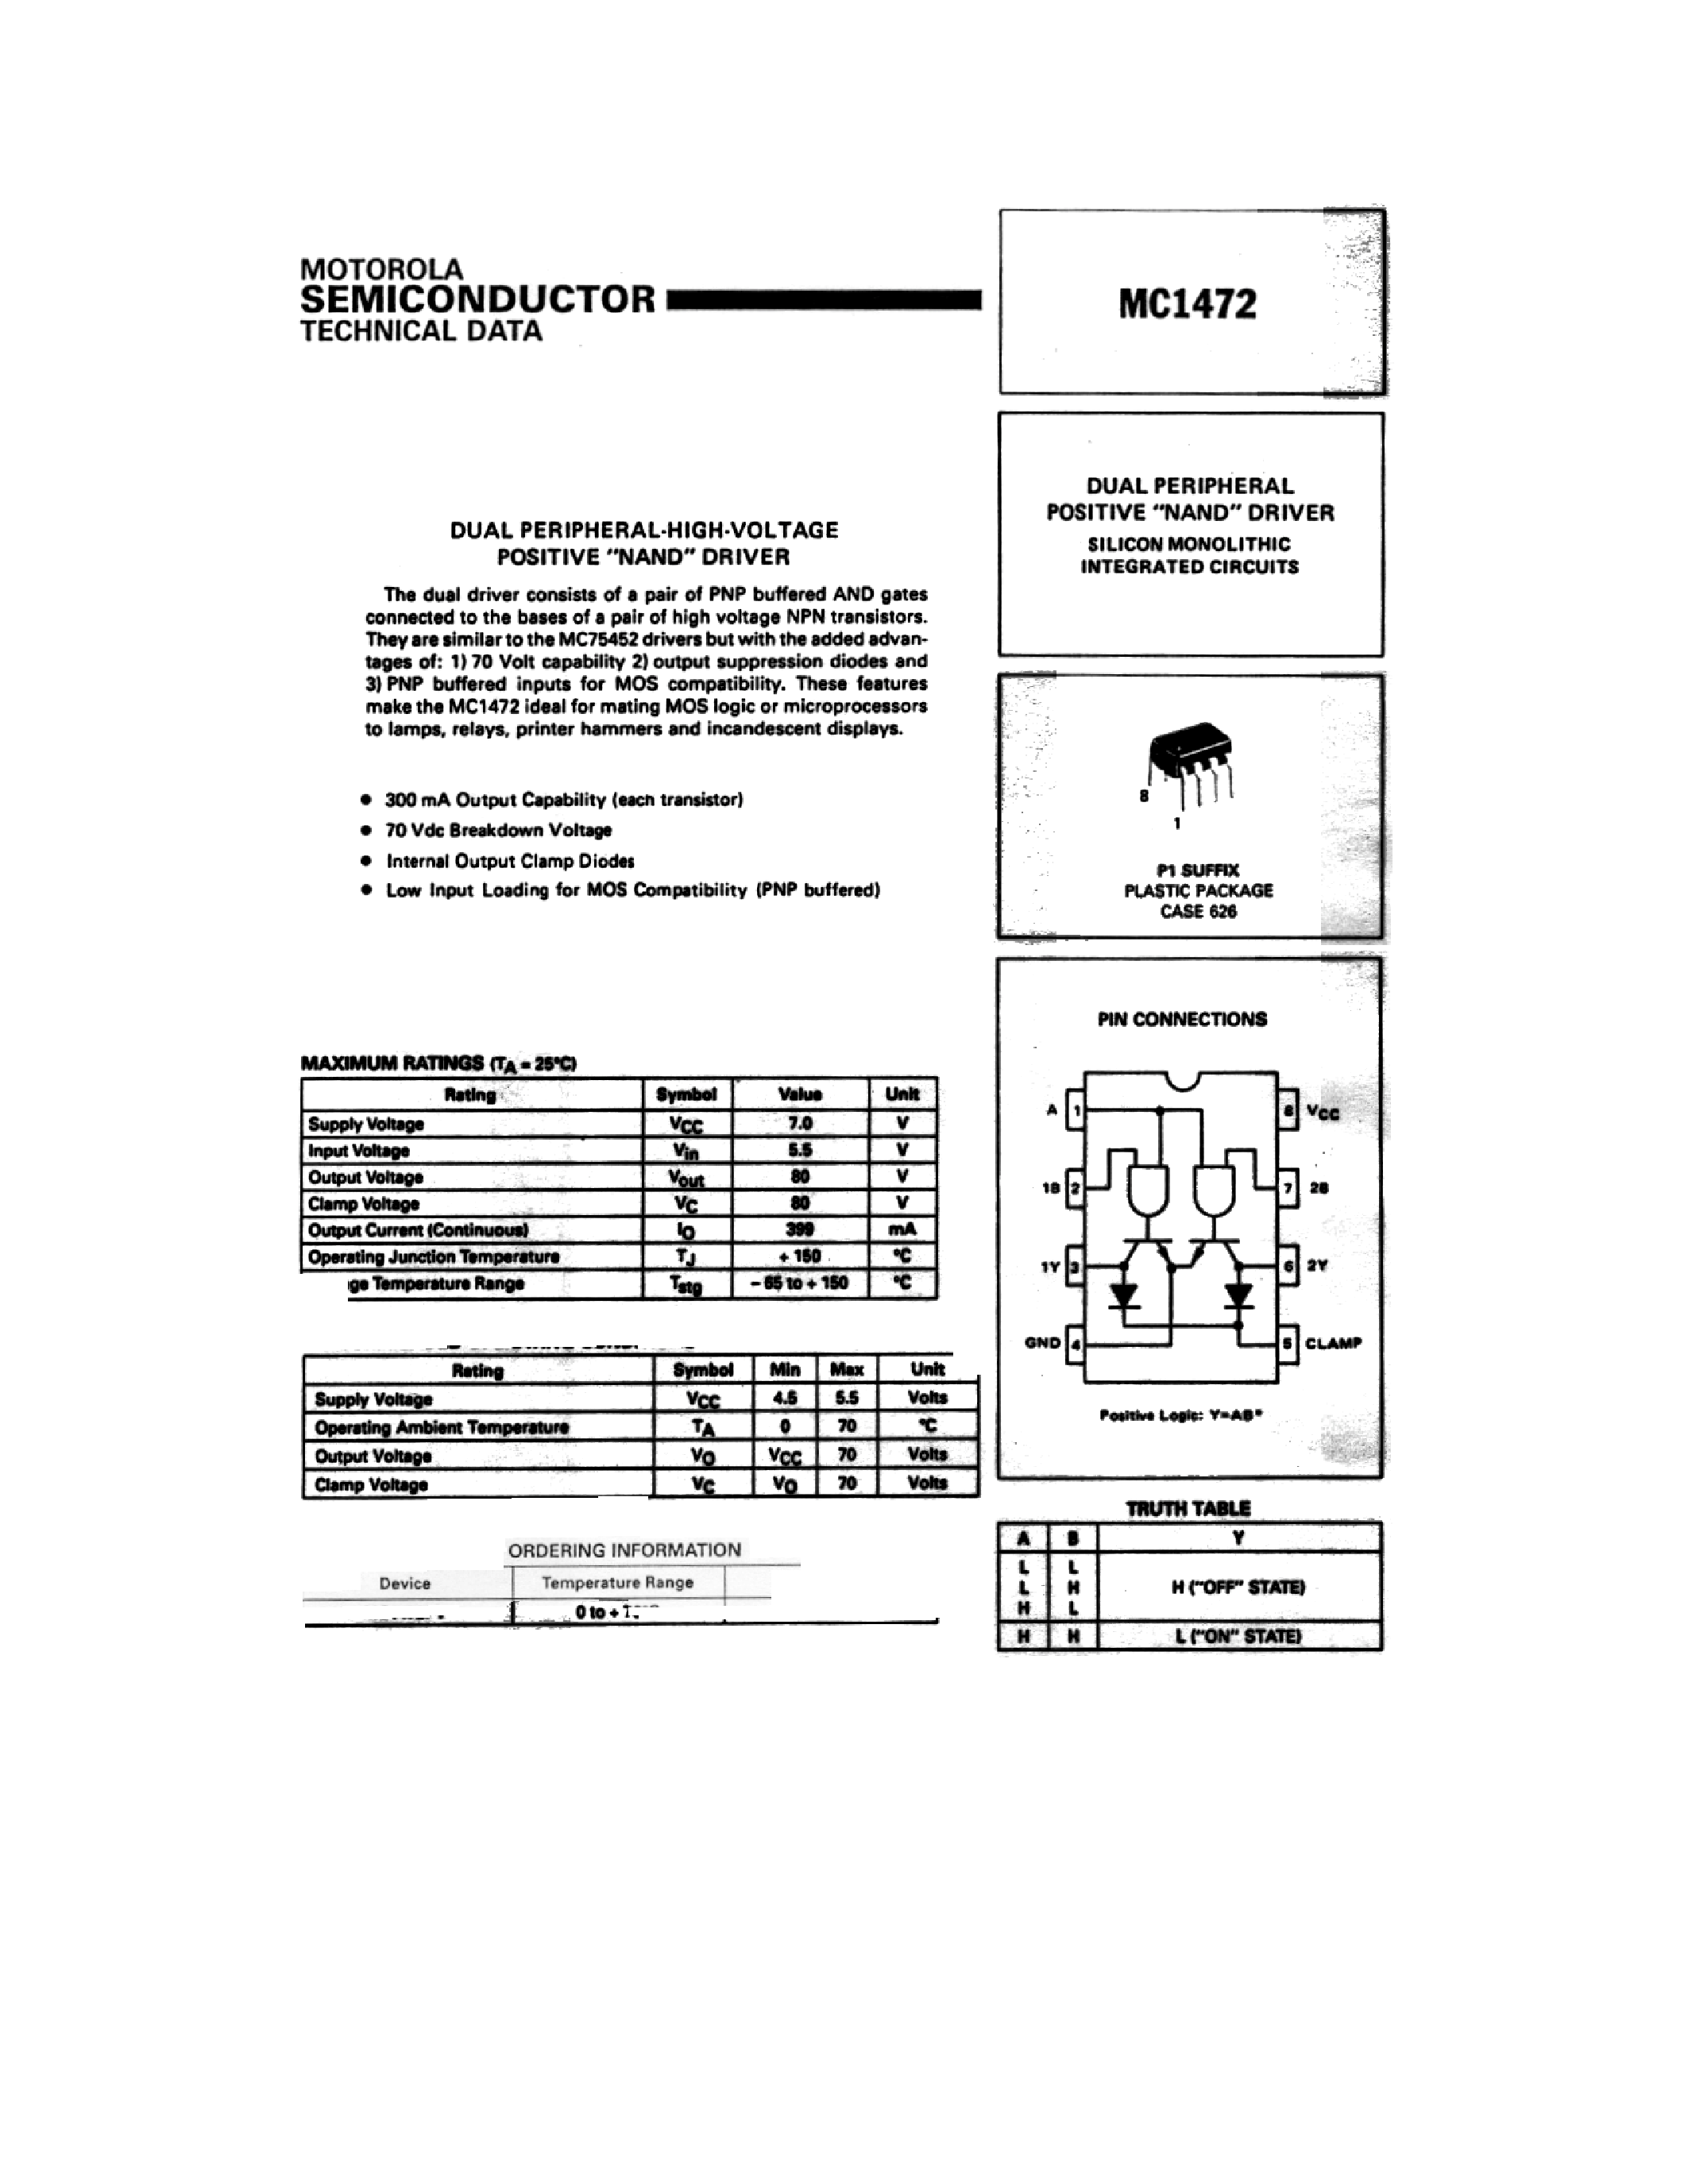 Datasheet MC1472 - DUAL PERIPHERAL-HIGH-VOLTAGE POSITIVE NAND DRIVER page 1